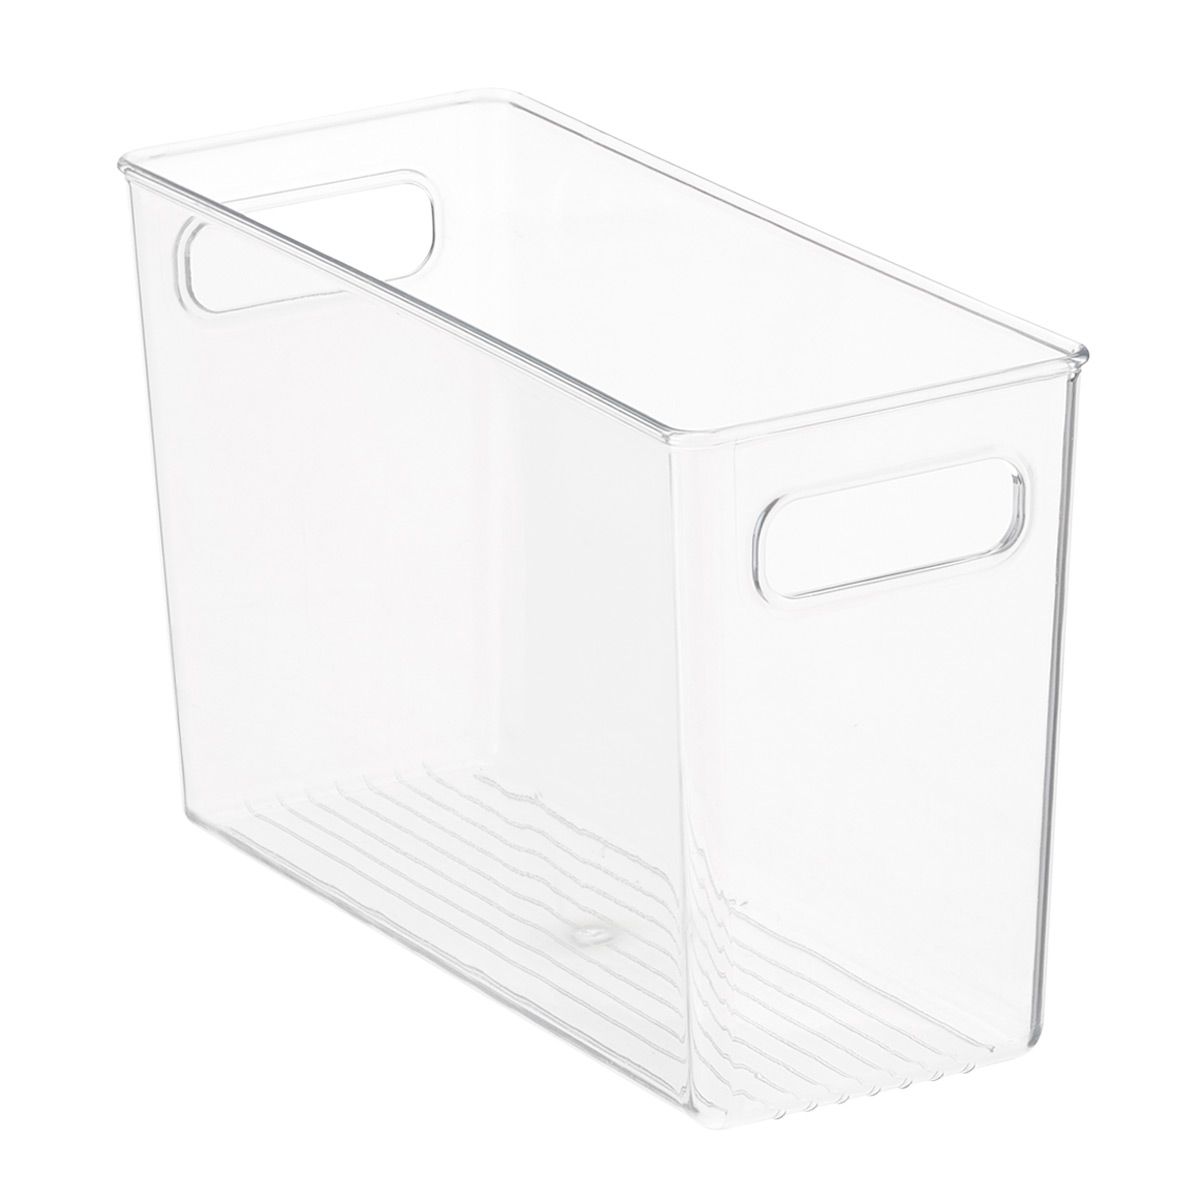 iDESIGN Linus Small Kitchen Bin Clear | The Container Store